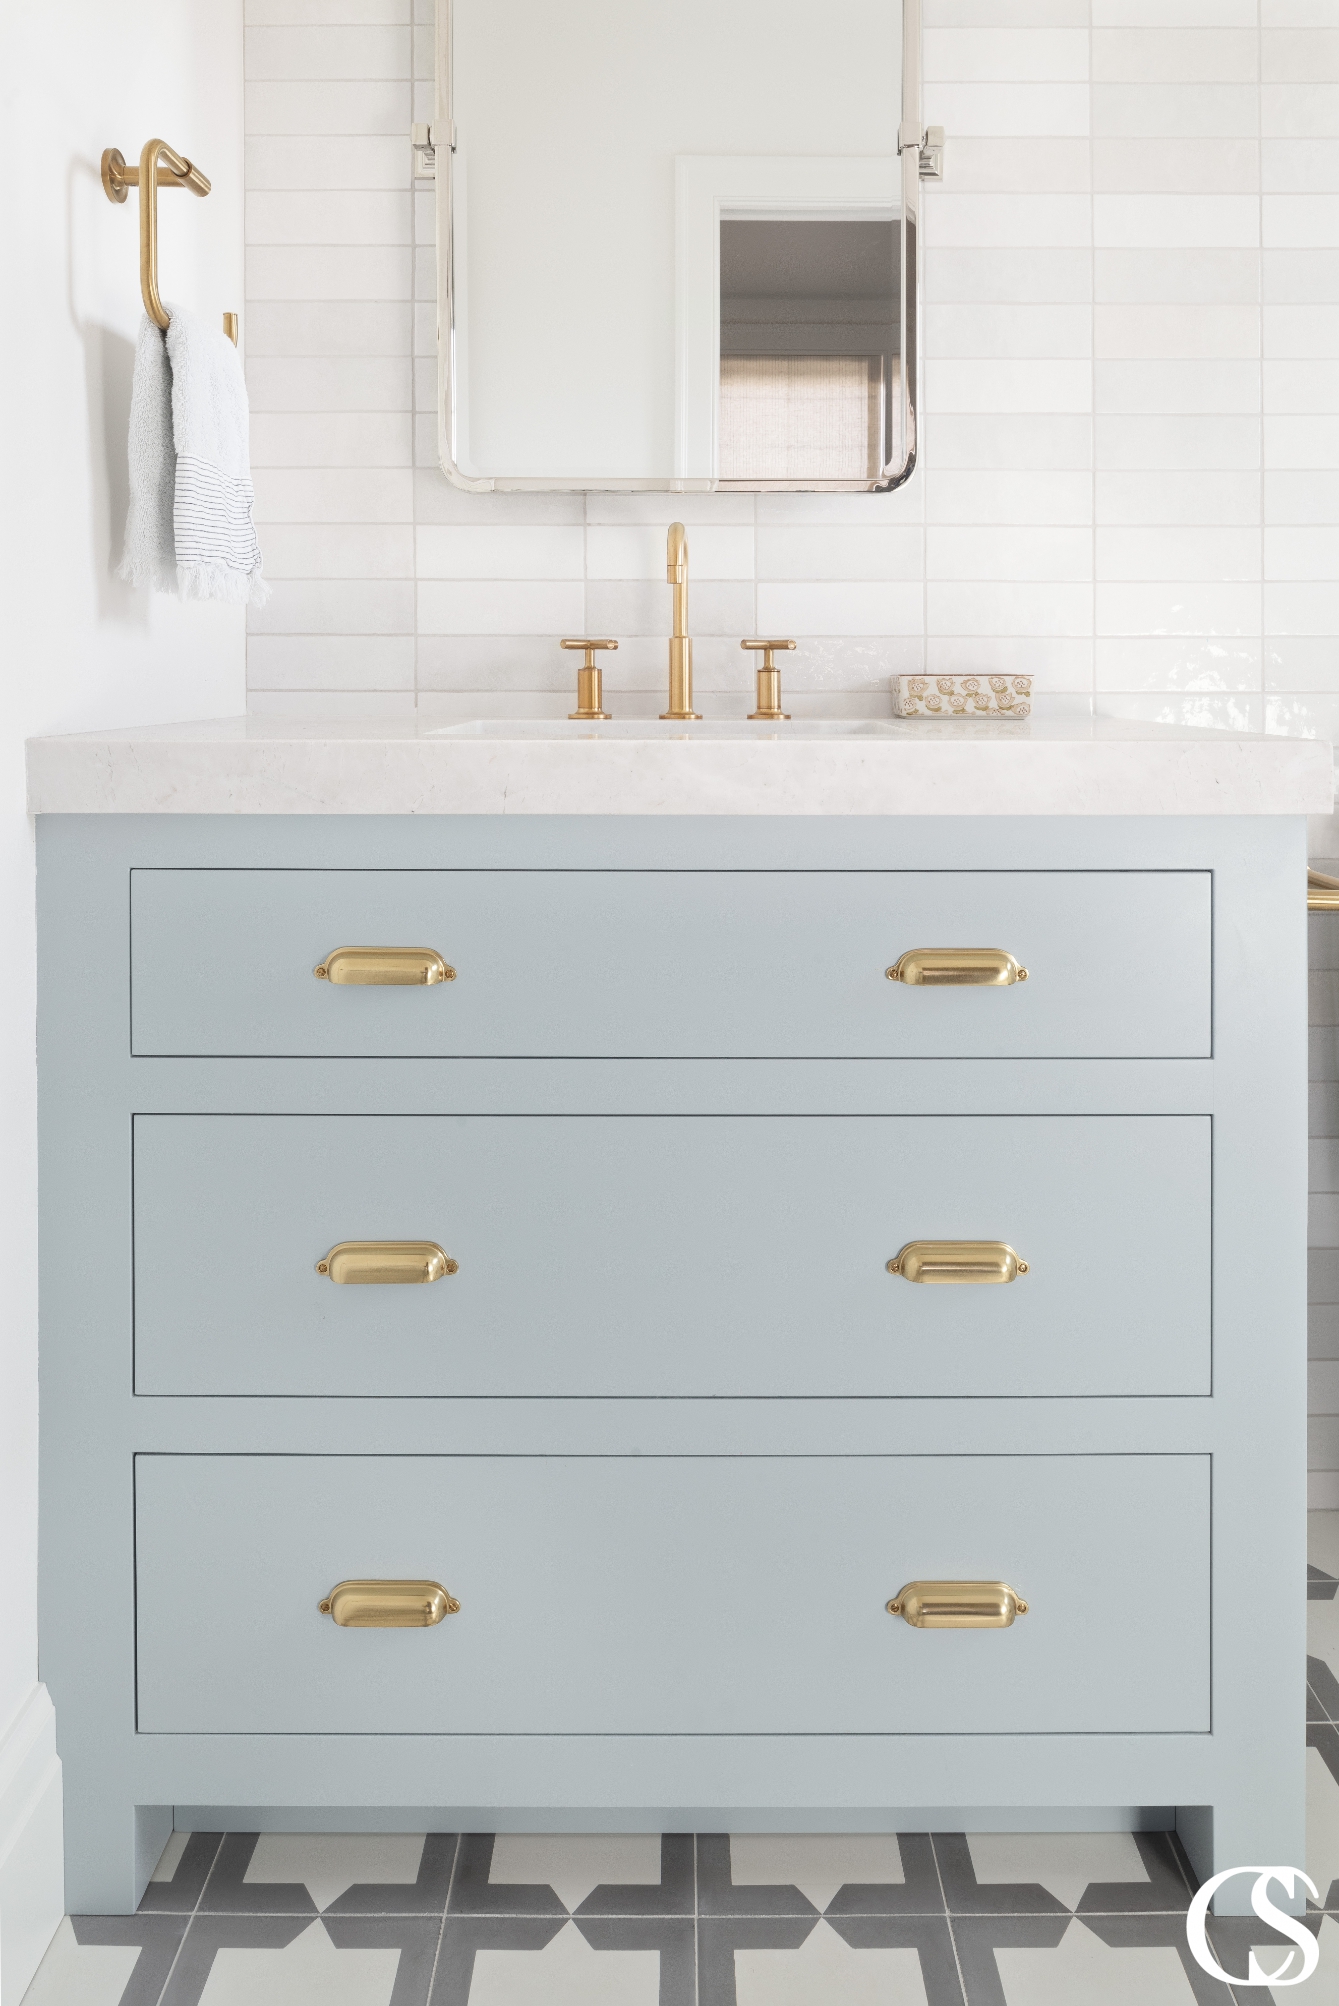 Elegant custom bathroom cabinets crafted from premium materials, including a marble countertop and intricate carvings on the doors and drawers.